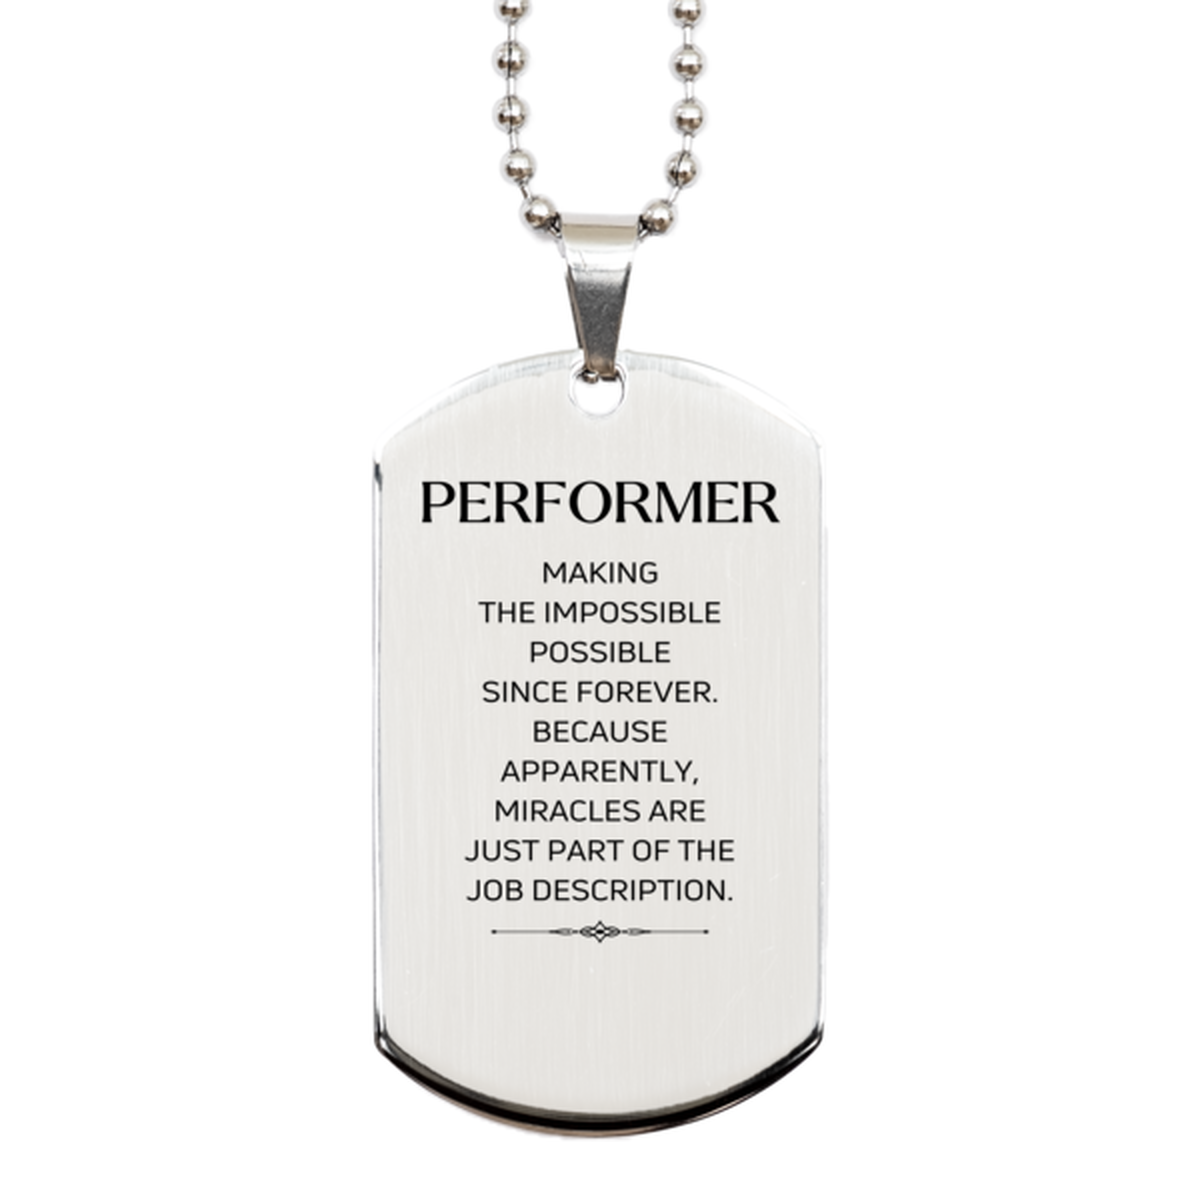 Funny Performer Gifts, Miracles are just part of the job description, Inspirational Birthday Silver Dog Tag For Performer, Men, Women, Coworkers, Friends, Boss